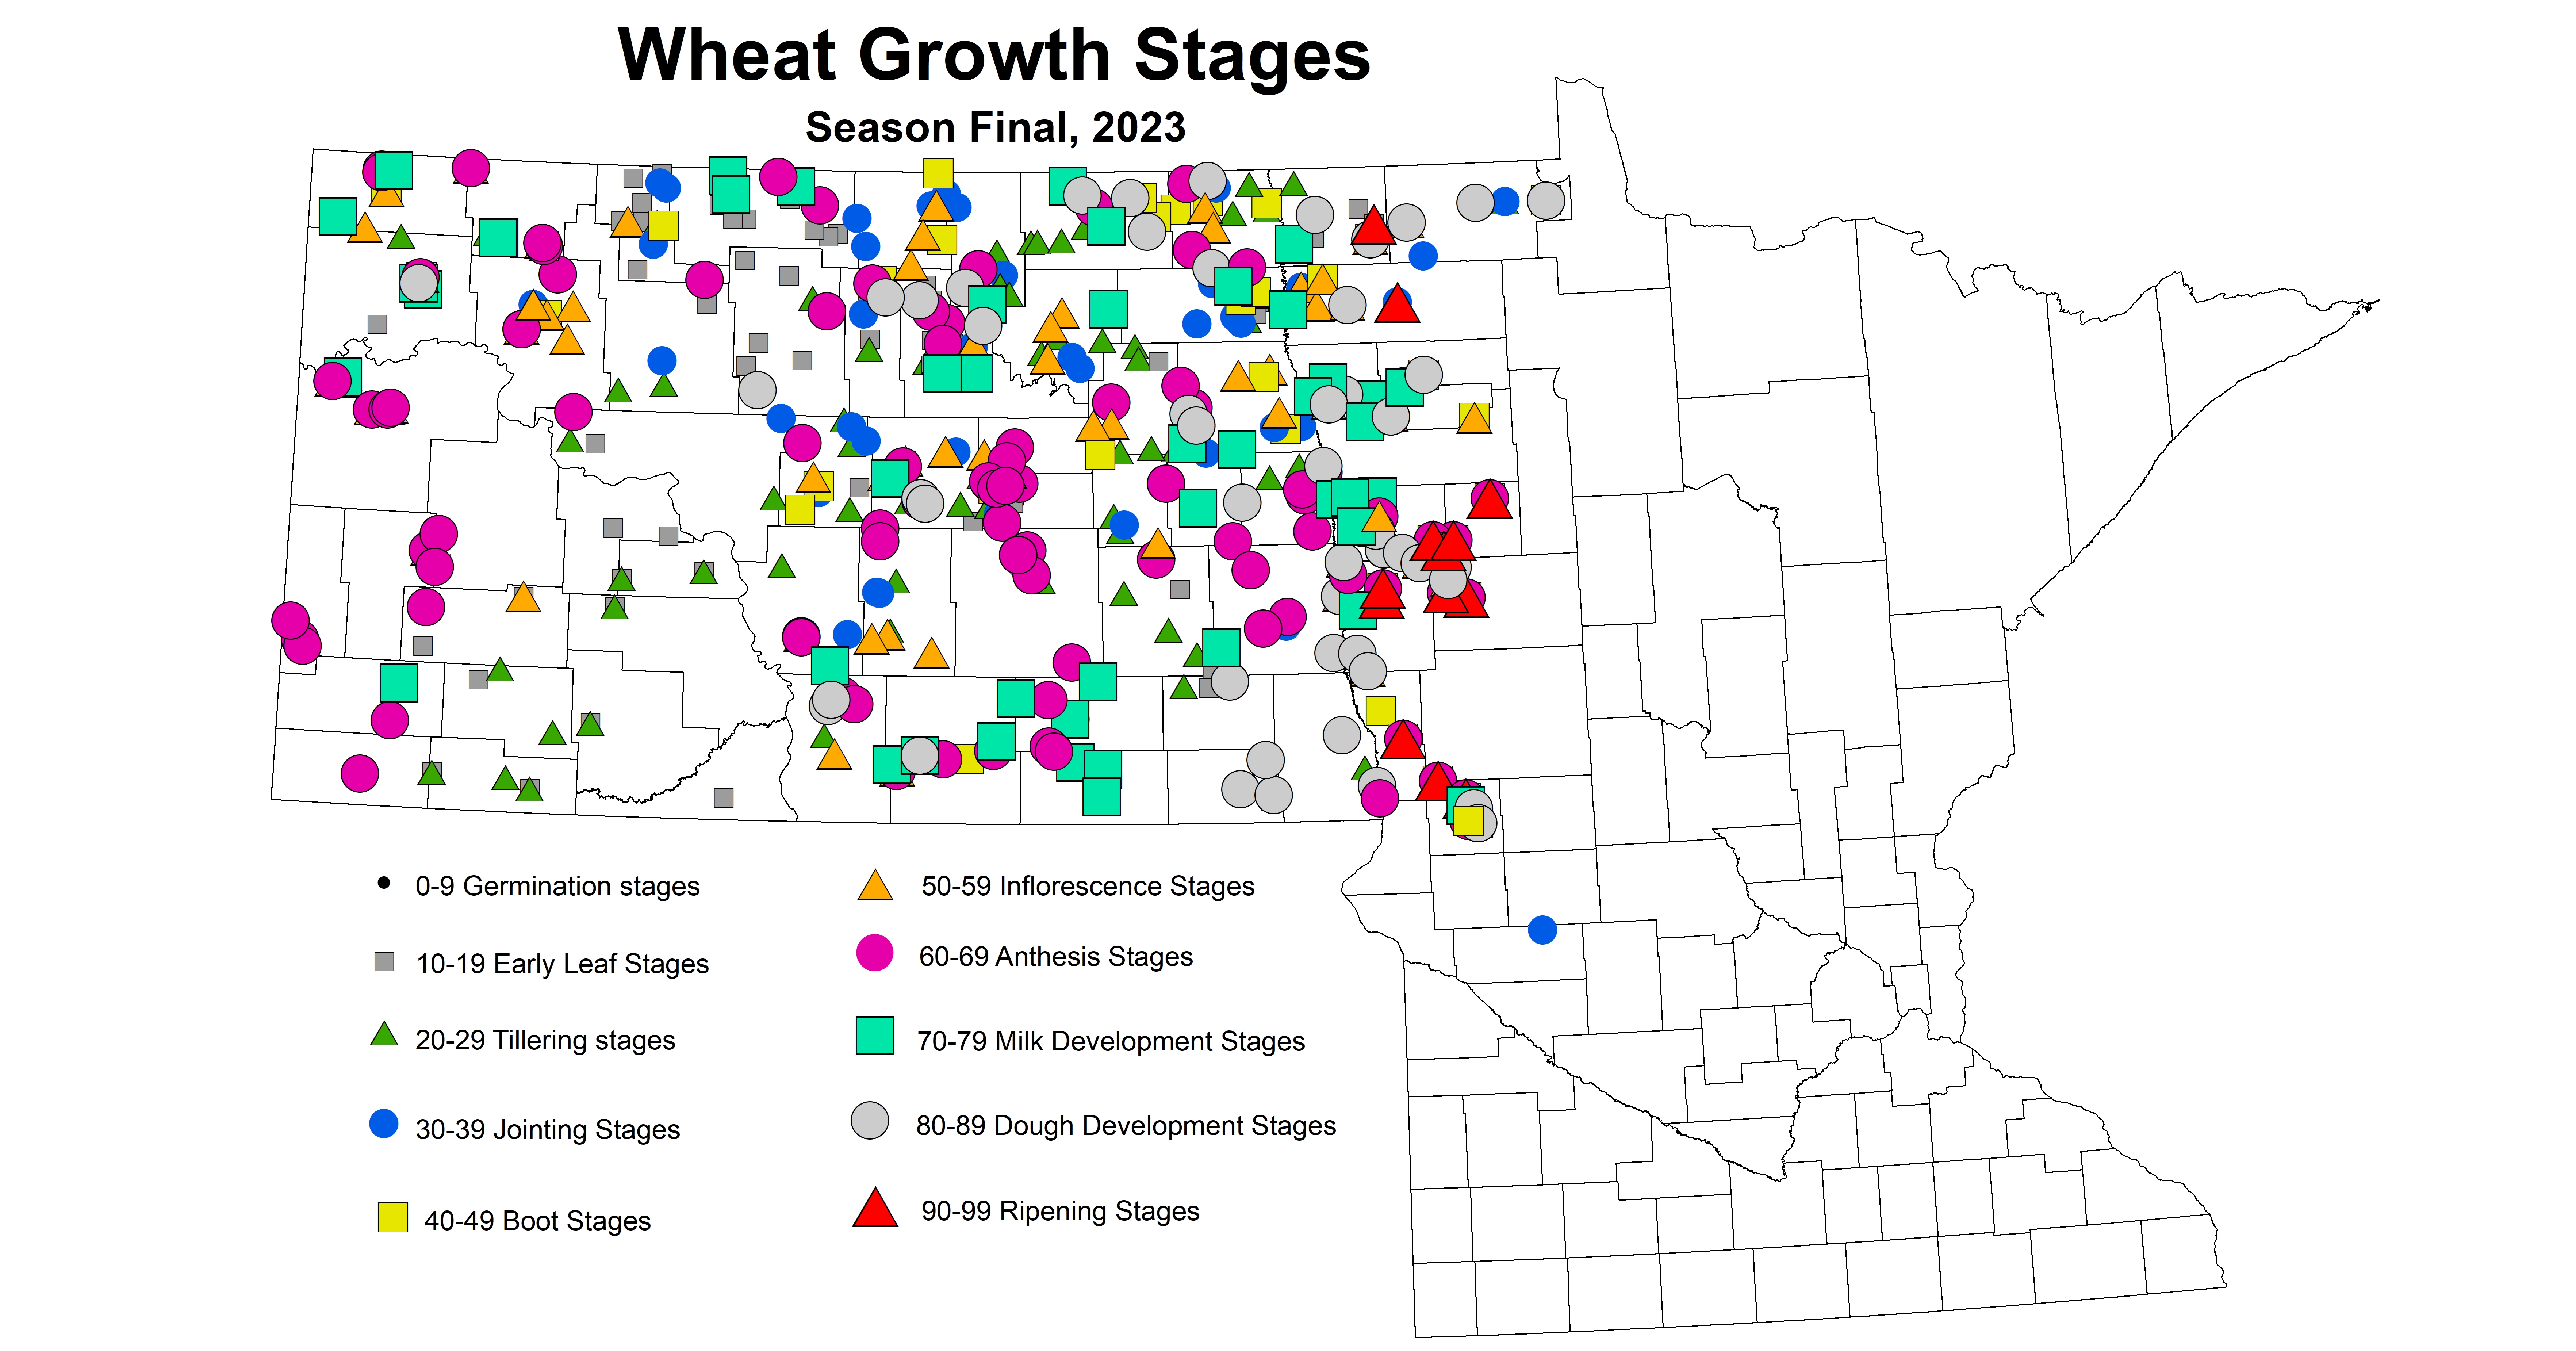 wheat growth stages season final 2023